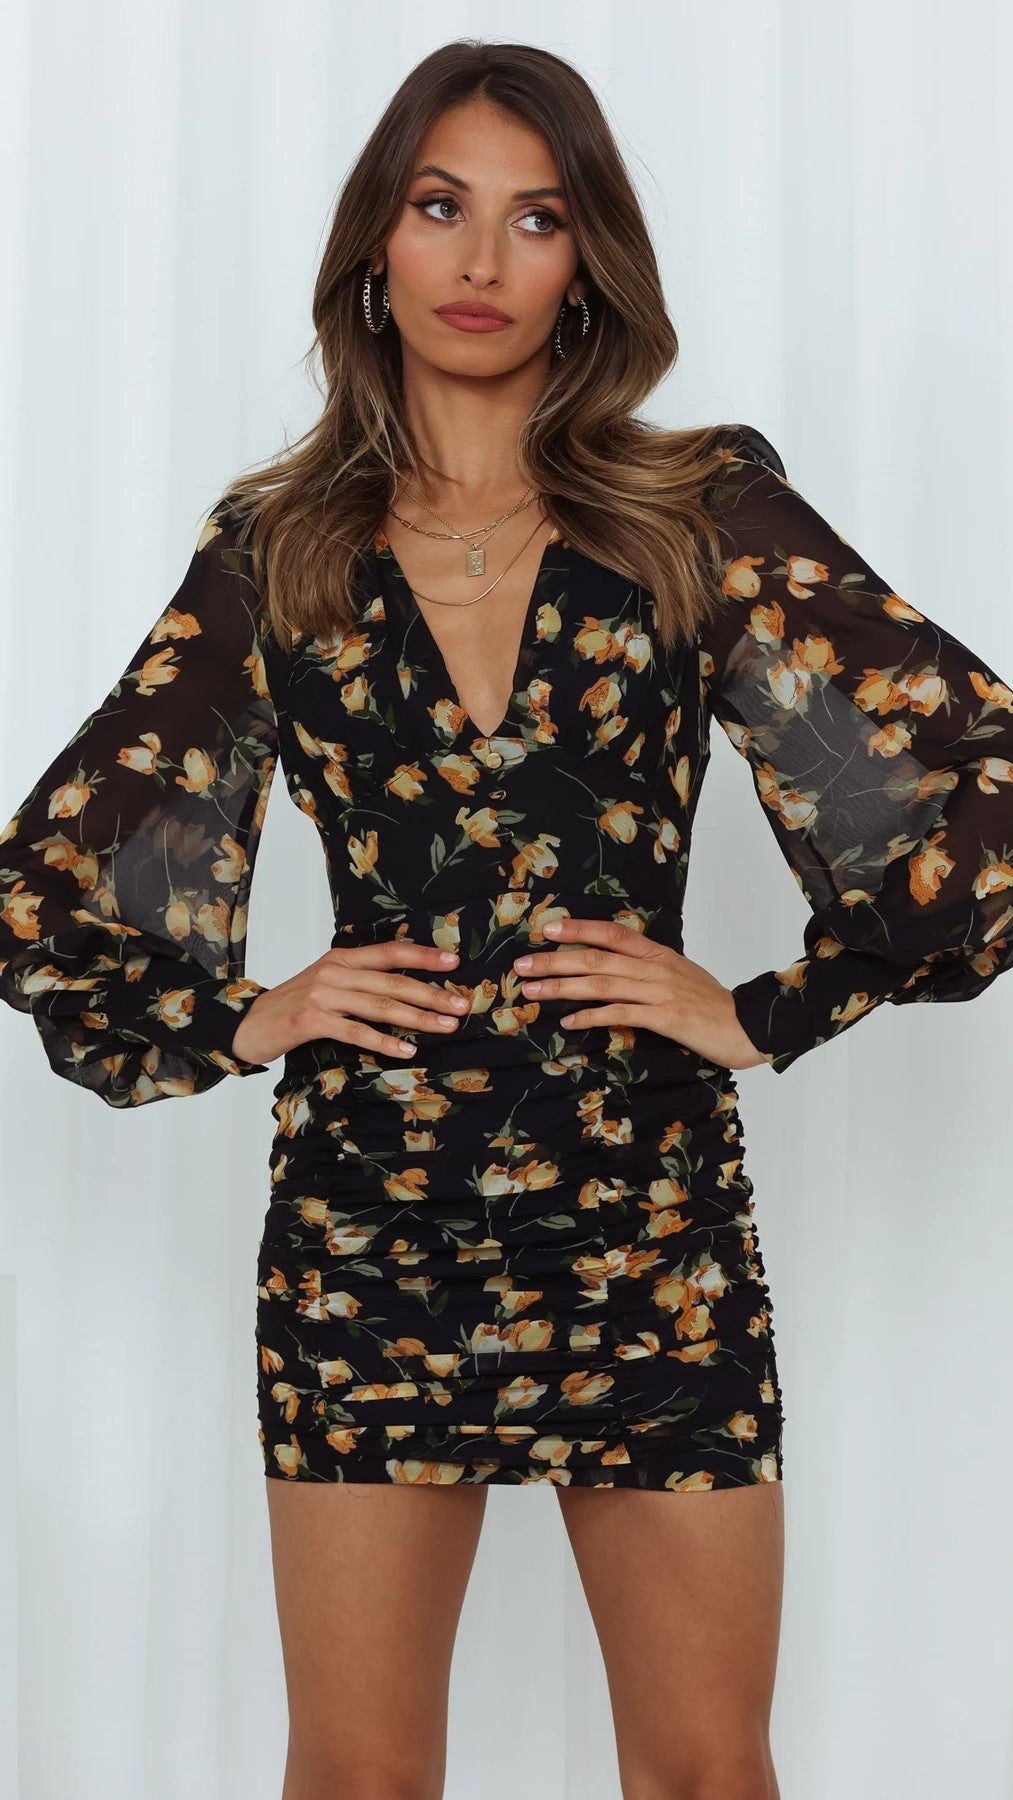 Black Floral Long Sleeves Bodycon Dress